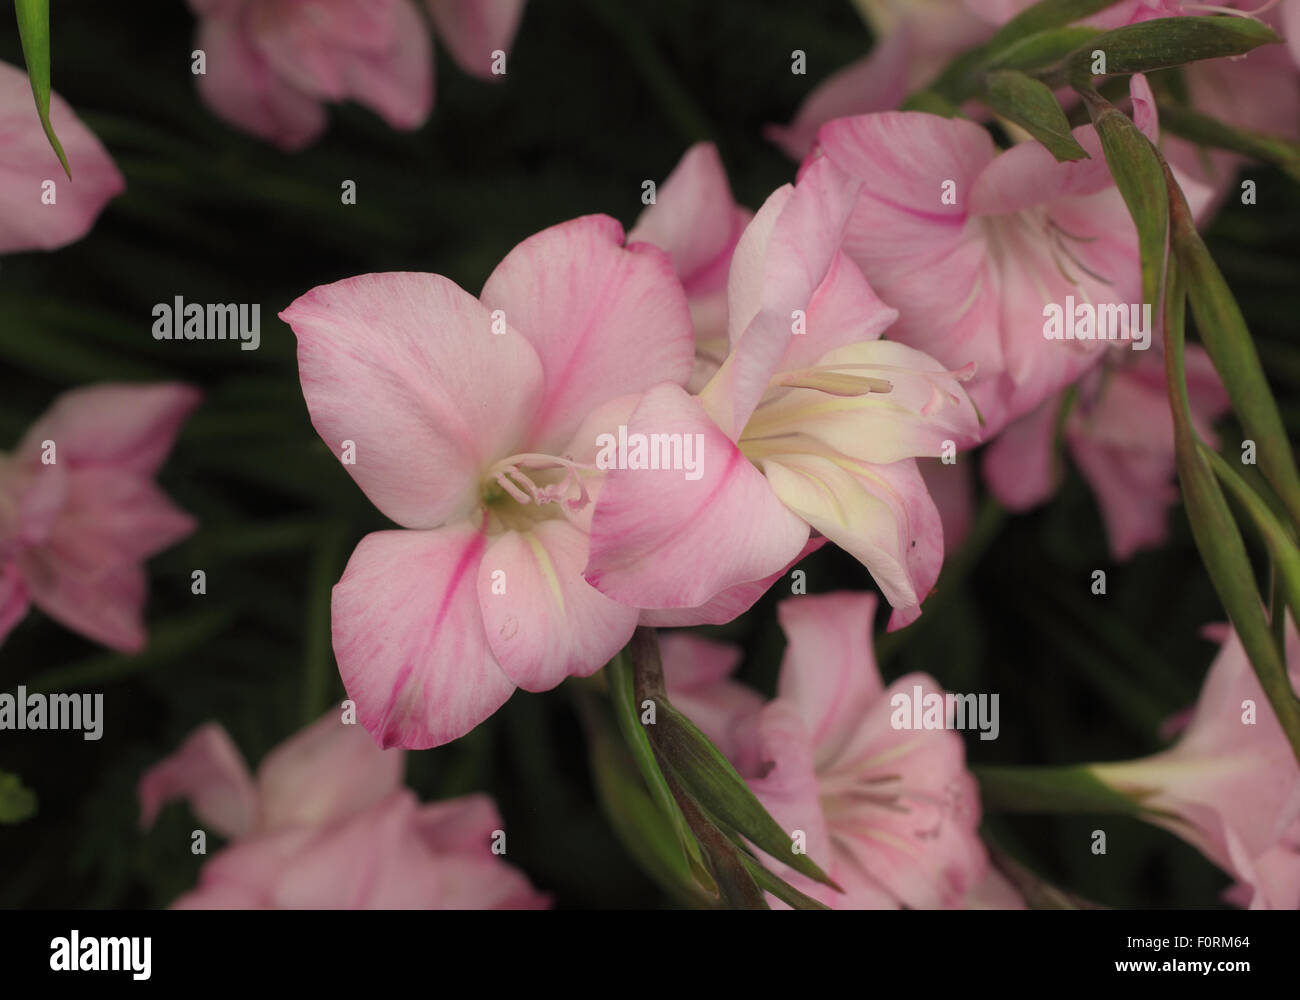 Gladiolus 'Charming Lady' close up of flowers Stock Photo